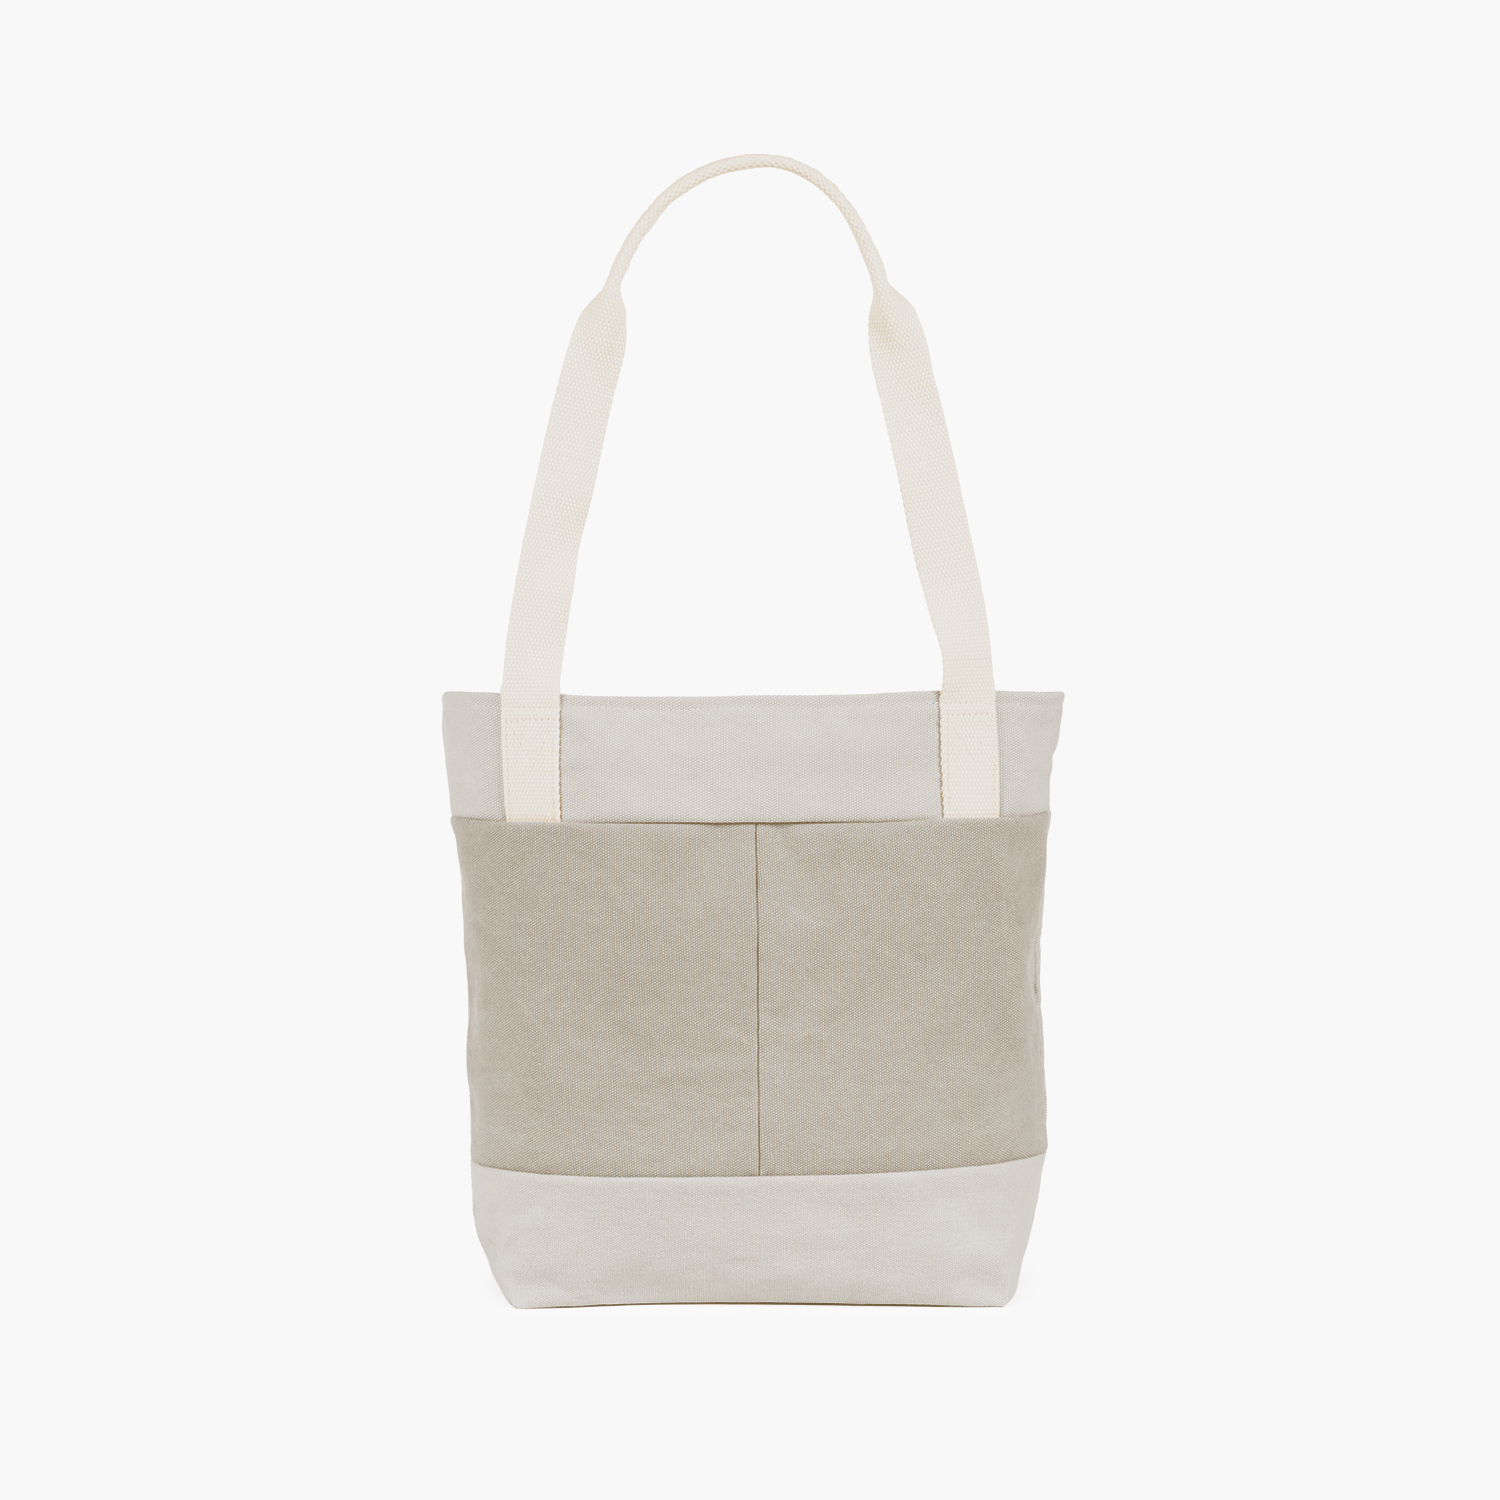 Shop Springwood Upcycled Canvas Tote